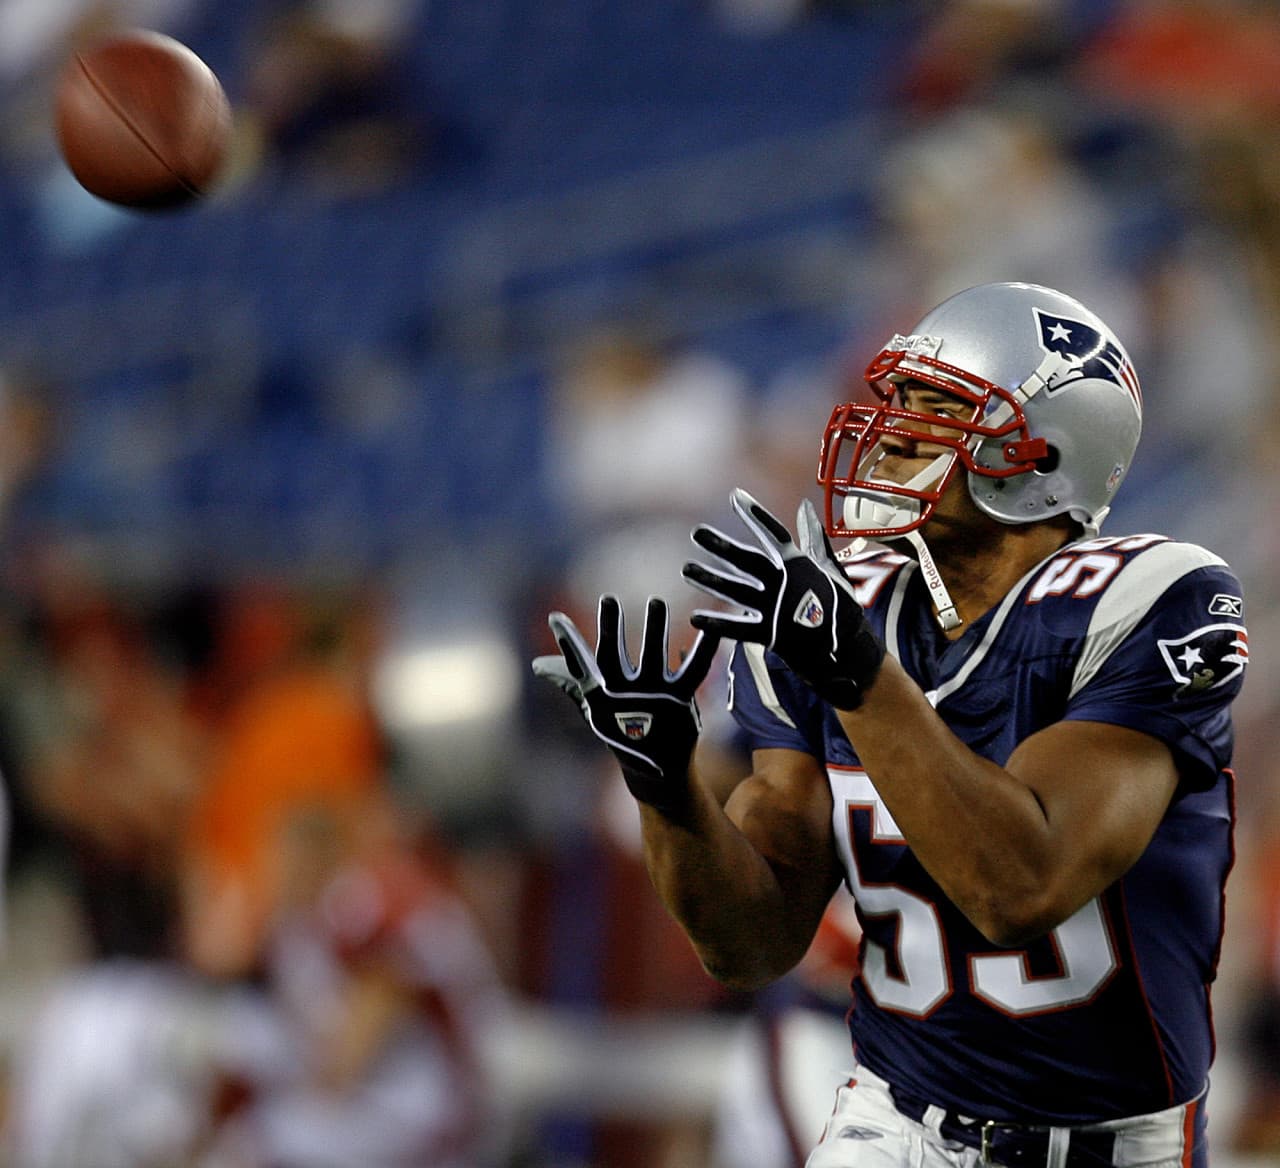 Former Patriots' linebacker, Junior Seau, warms up before a preseason NFL football game in Foxborough, Mass. in 2006. (Stephan Savoia/AP)